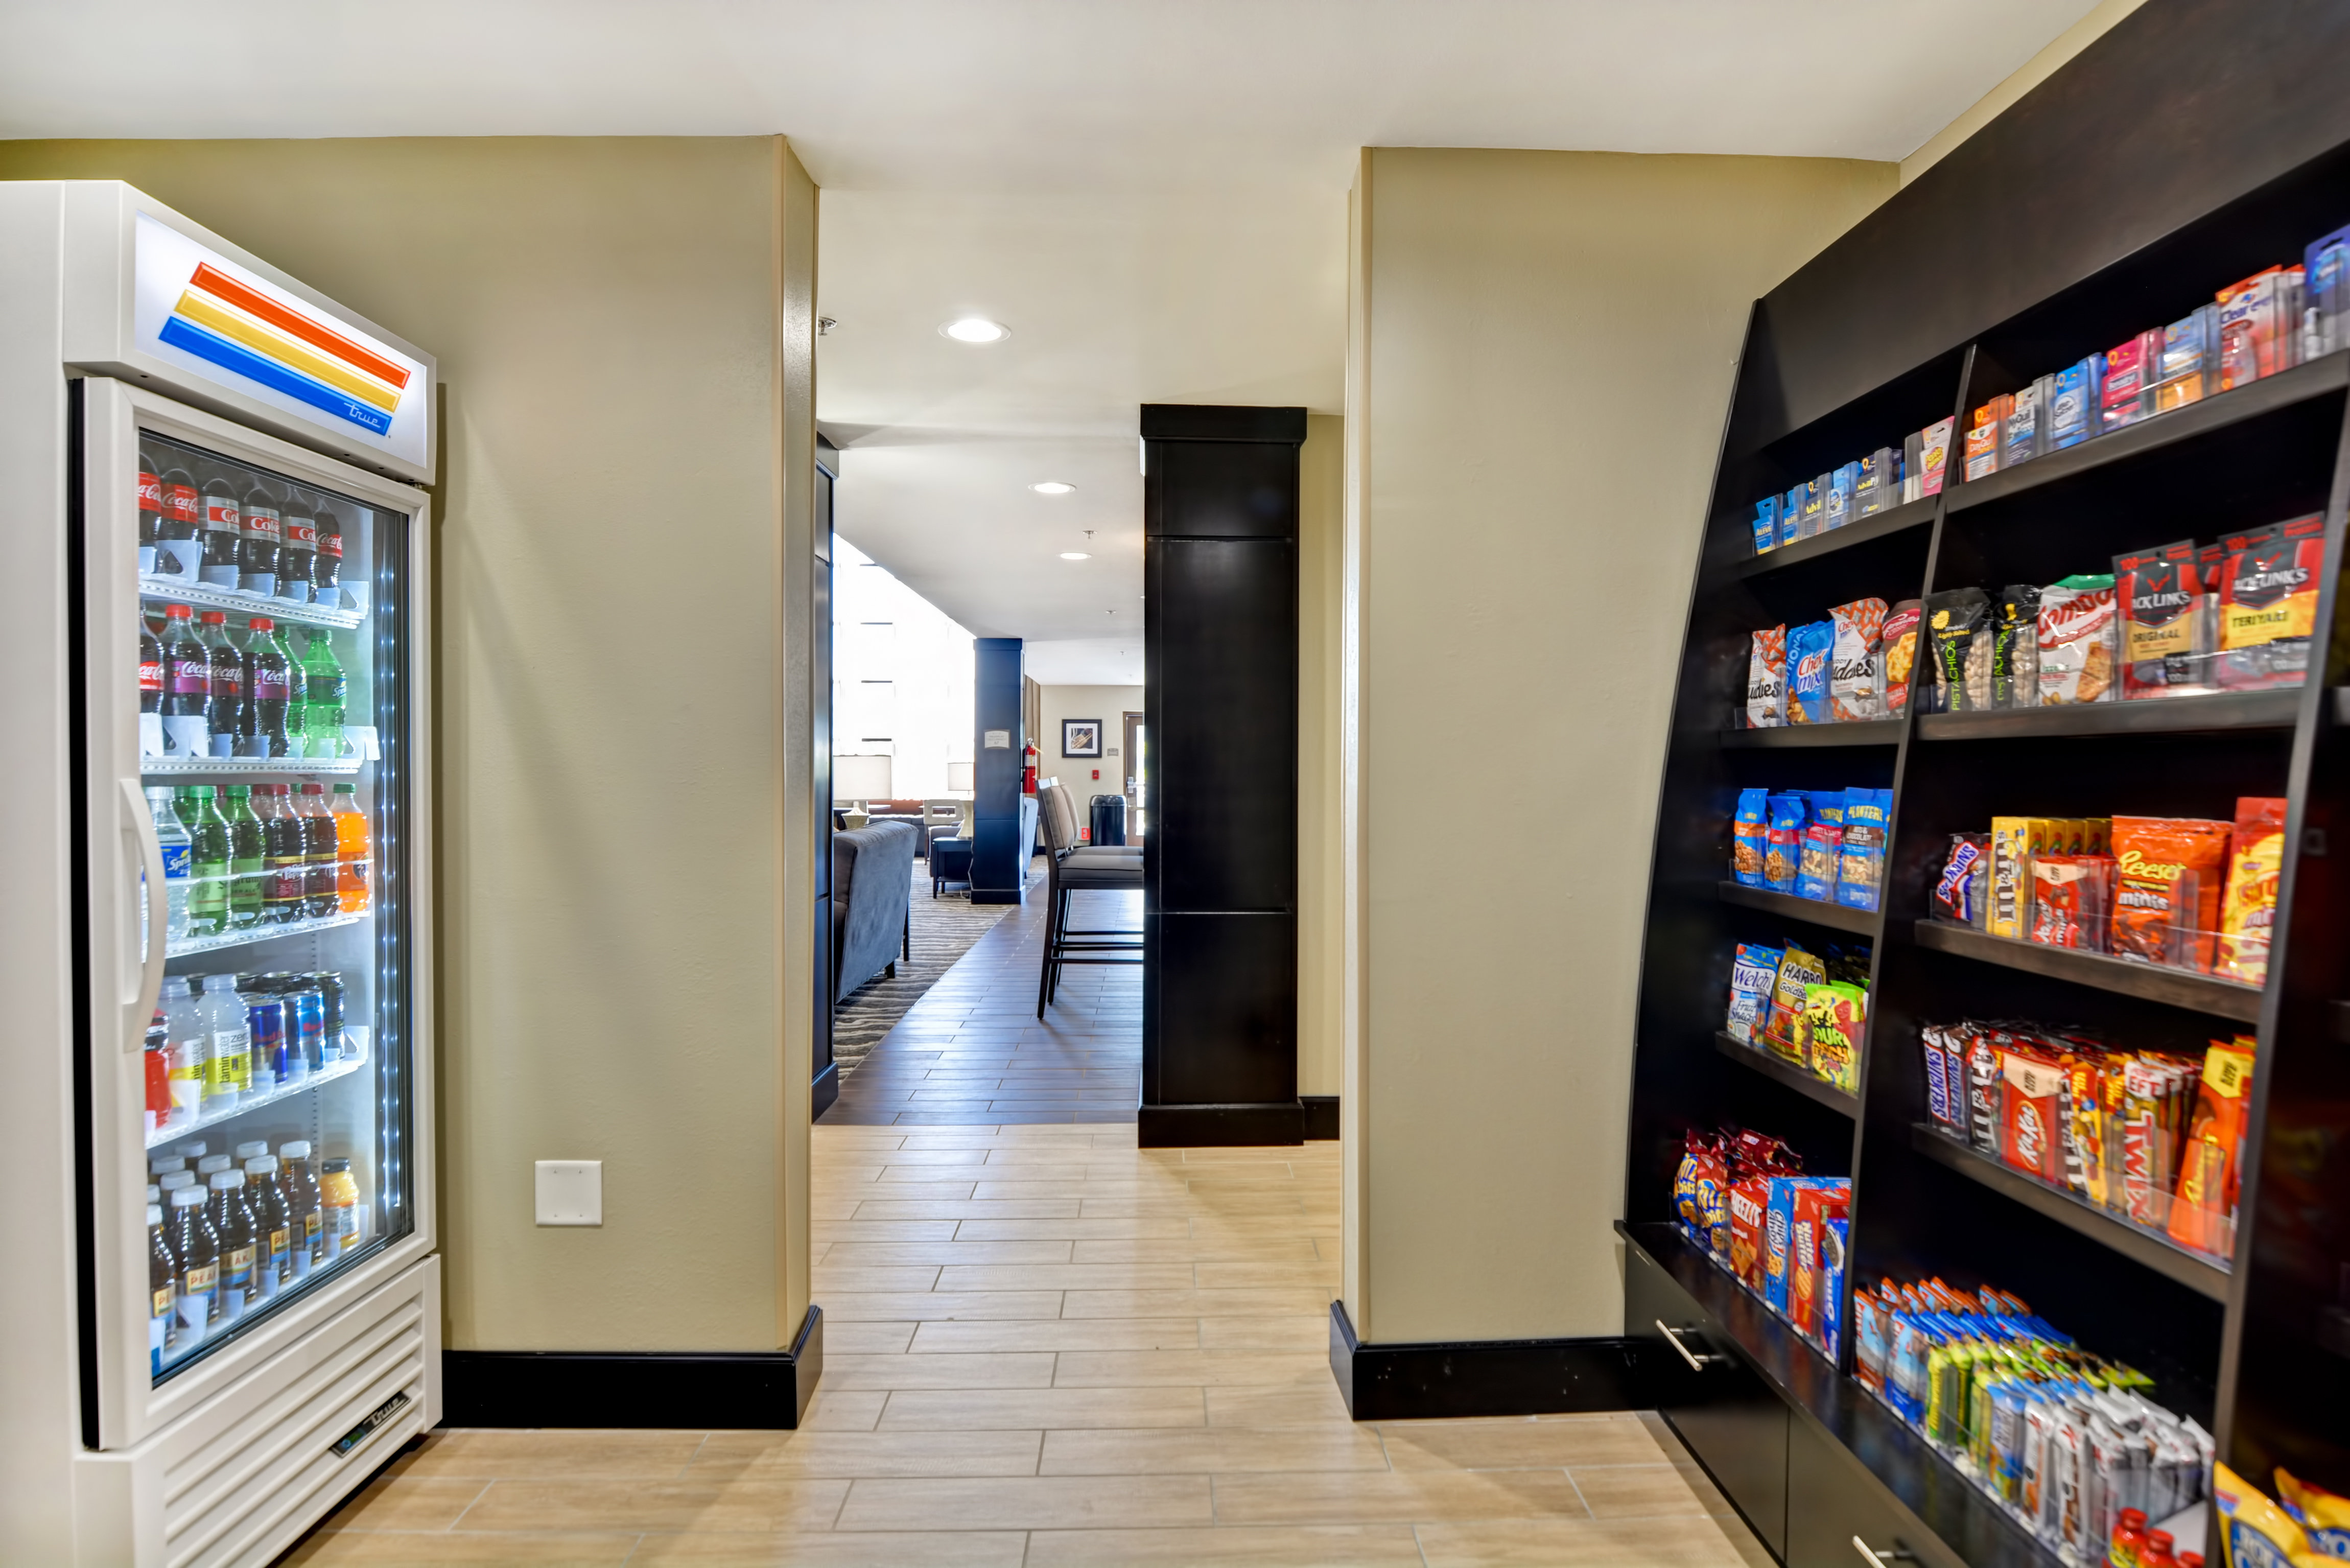 Snacks & drinks for purchase 24/7 at the Staybridge Suites Pantry